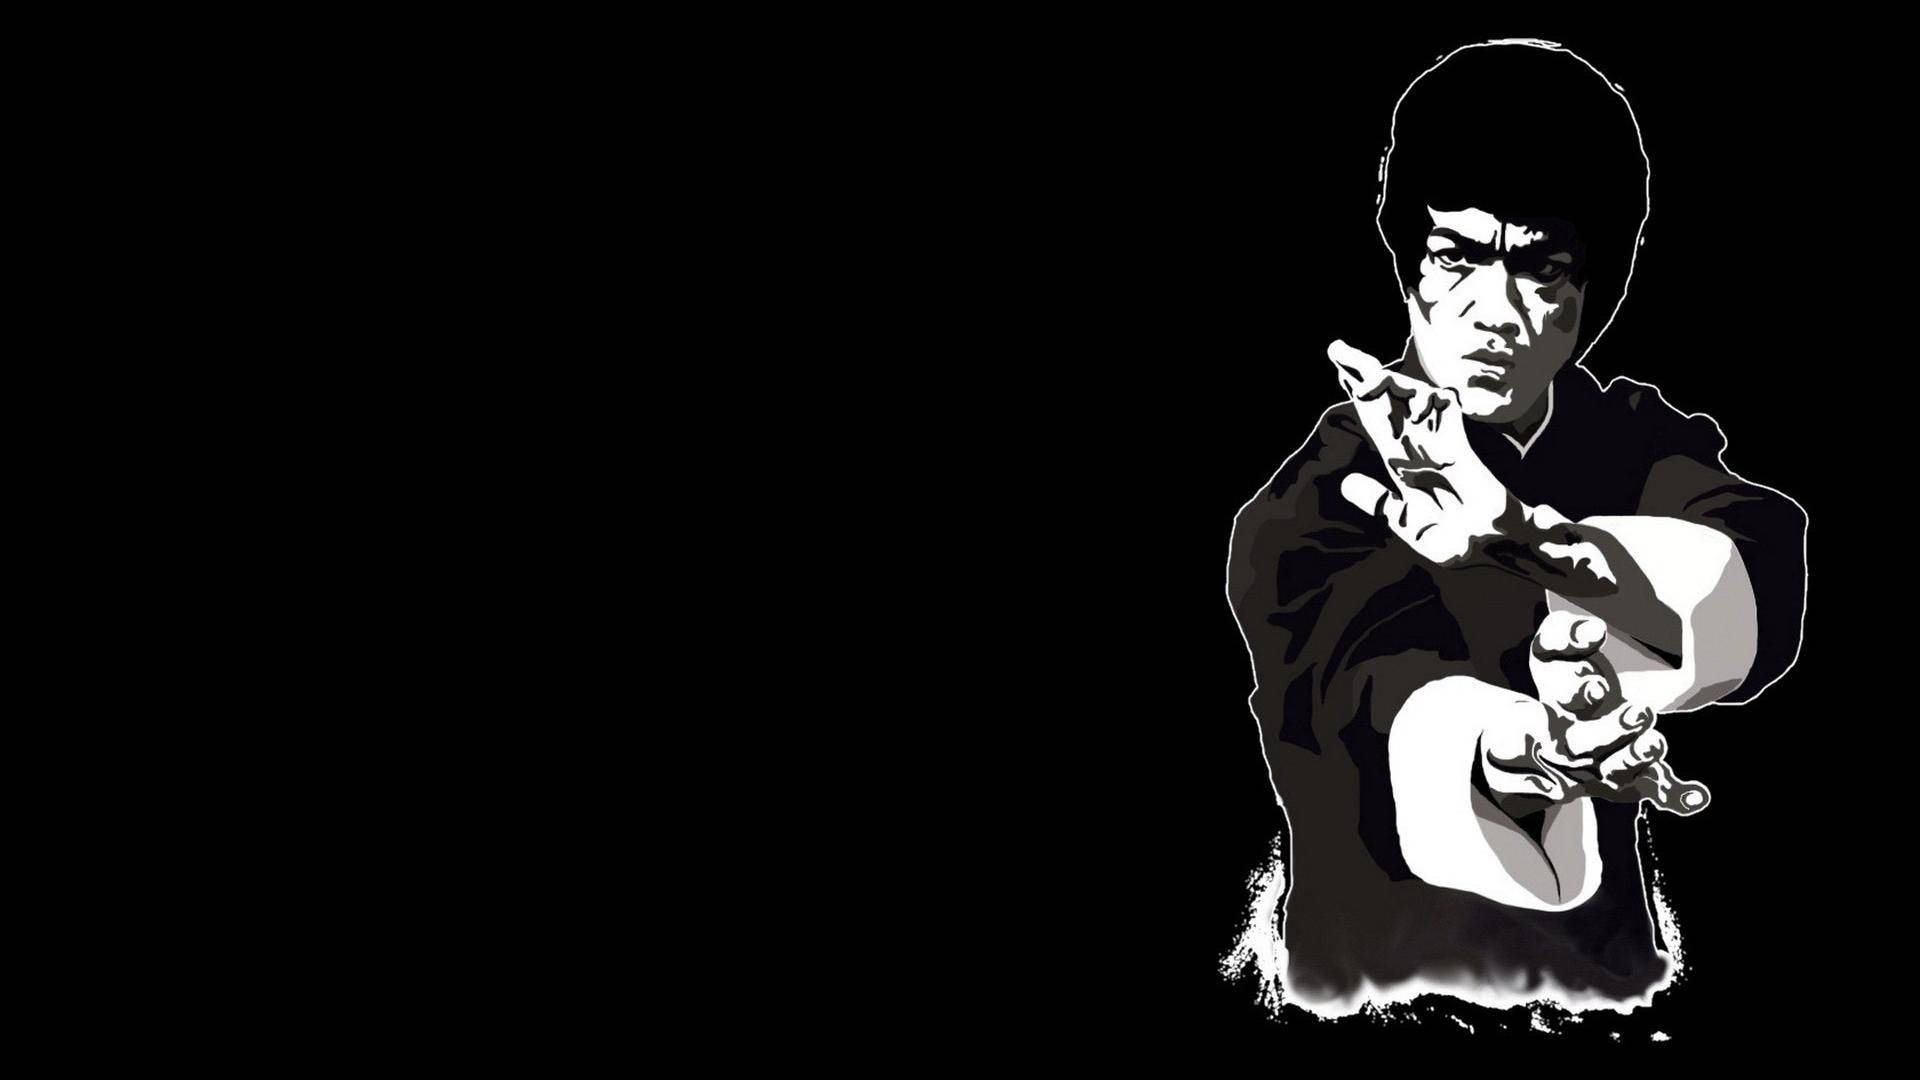 The Great Martial Arts Legend, Bruce Lee. Background